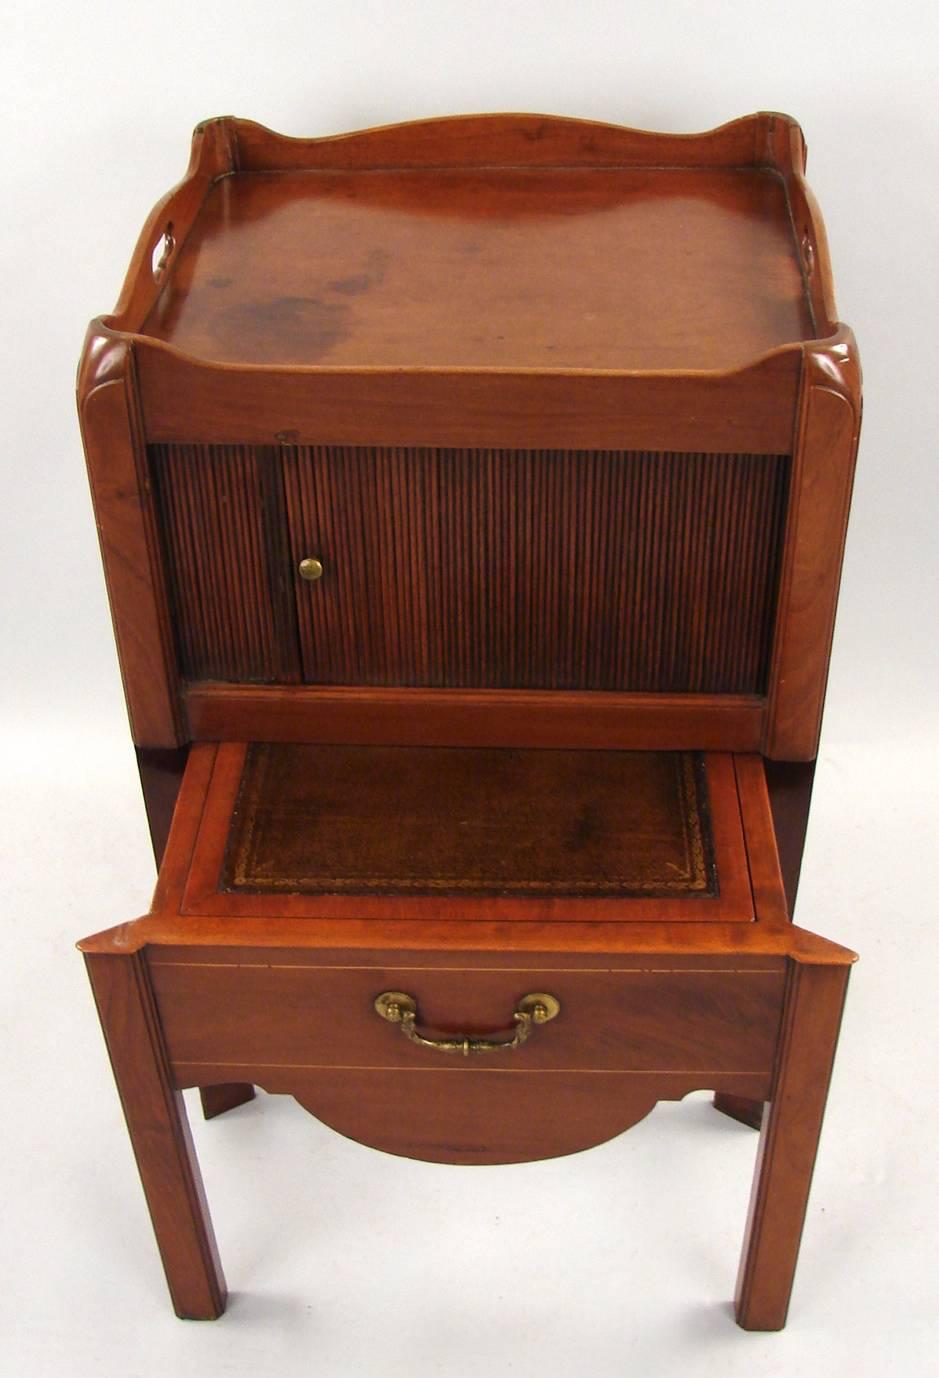 A George III mahogany bedside commode, the tray top with carrying handles above a tambour door over a slide out drawer now with a gilt-tooled leather lined surface, circa 1800.